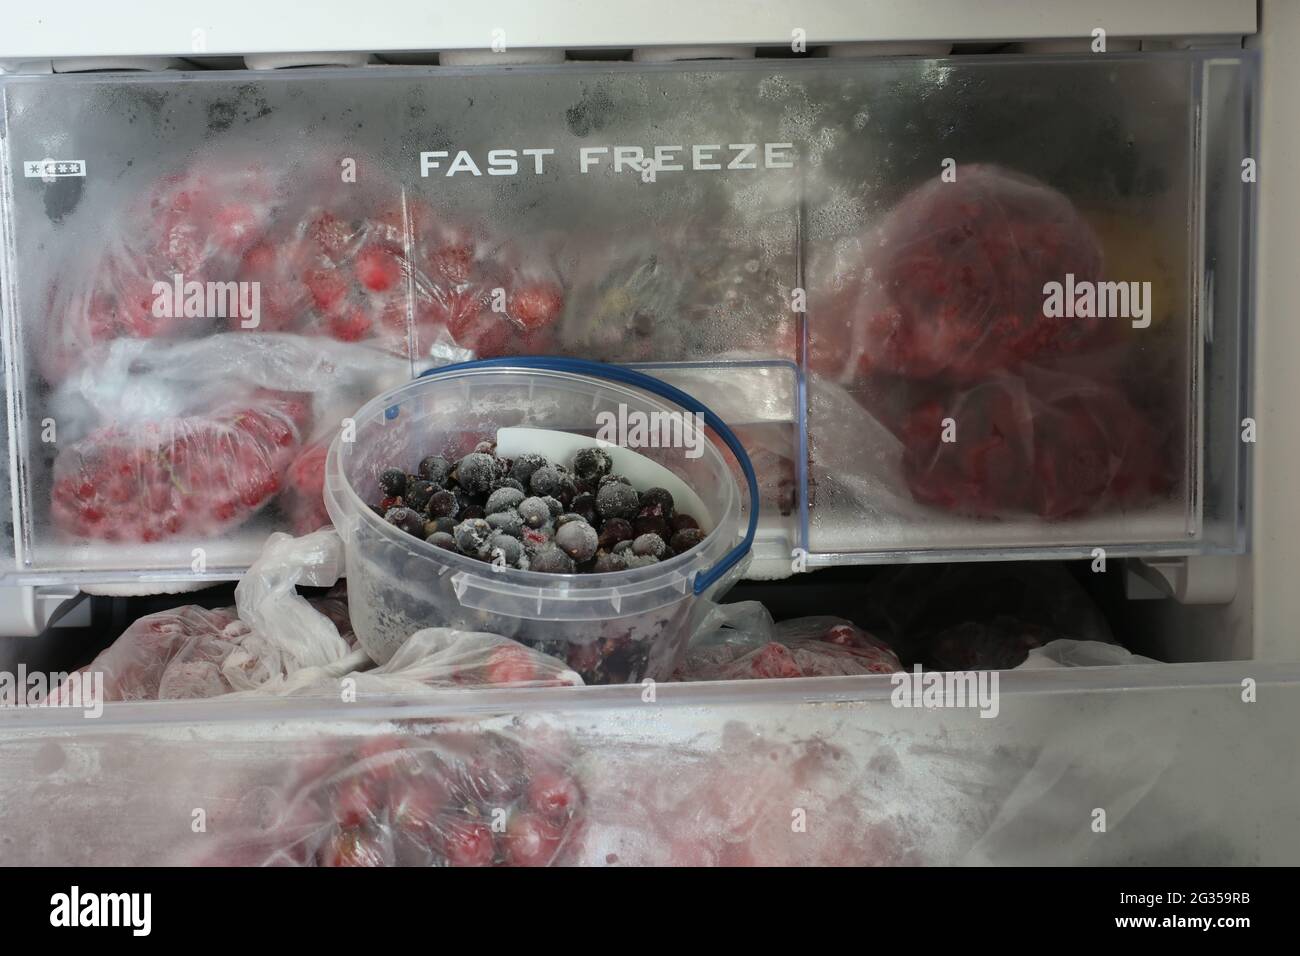 https://c8.alamy.com/comp/2G359RB/frozen-berries-in-the-freezer-inscription-fast-freeze-on-a-plastic-container-for-quick-freezing-2G359RB.jpg